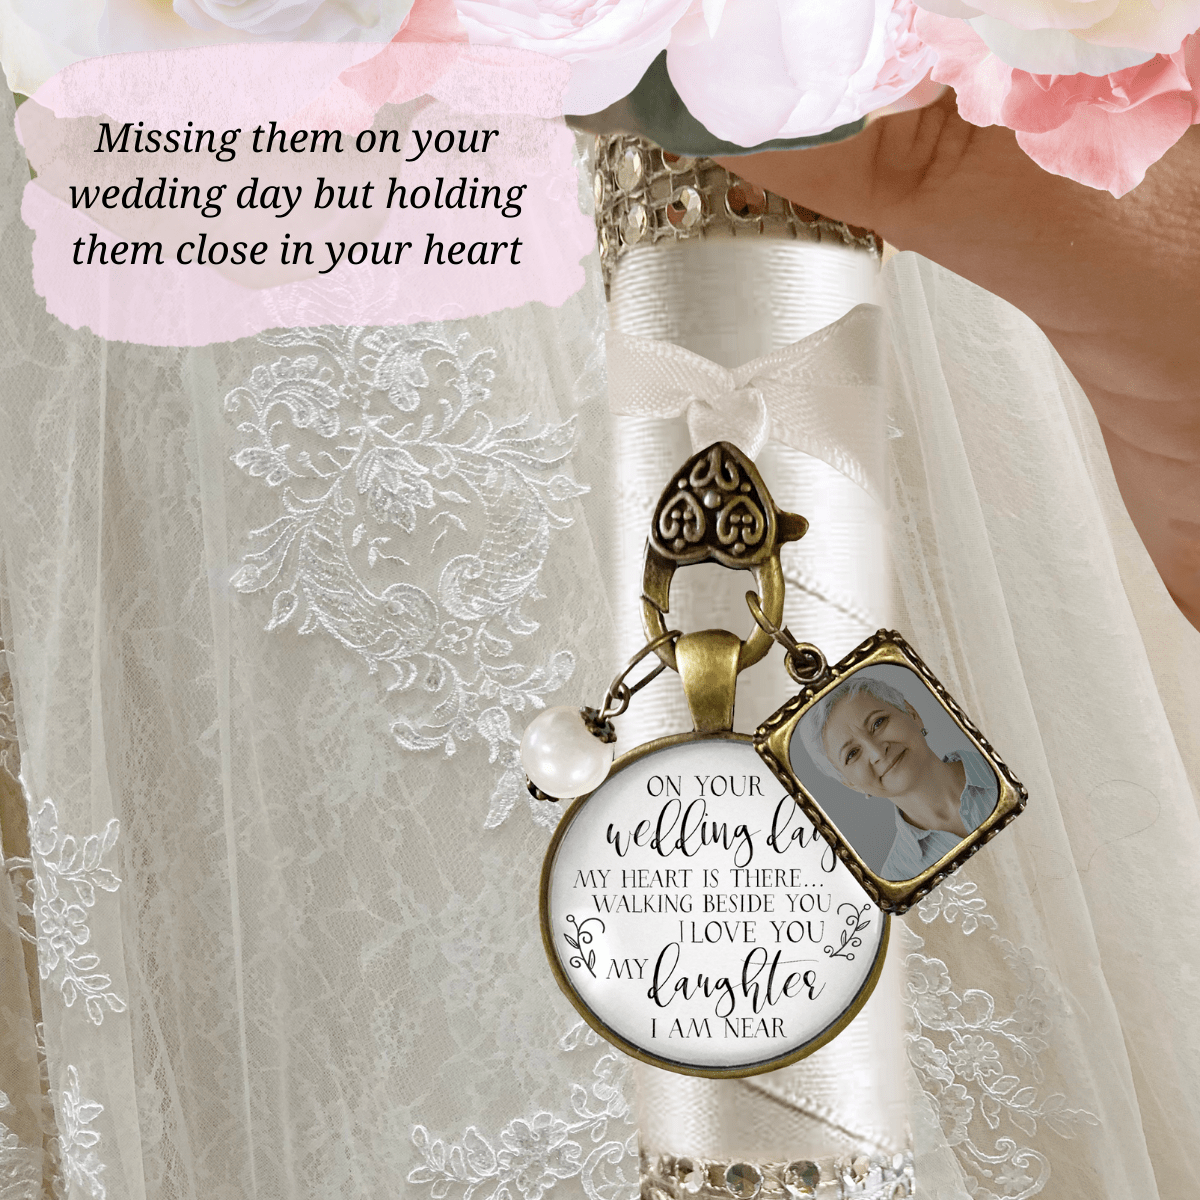 Bouquet Charm On Your Wedding Day Of Mom Dad White Bridal Memorial Photo Frame - Gutsy Goodness Handmade Jewelry Gifts